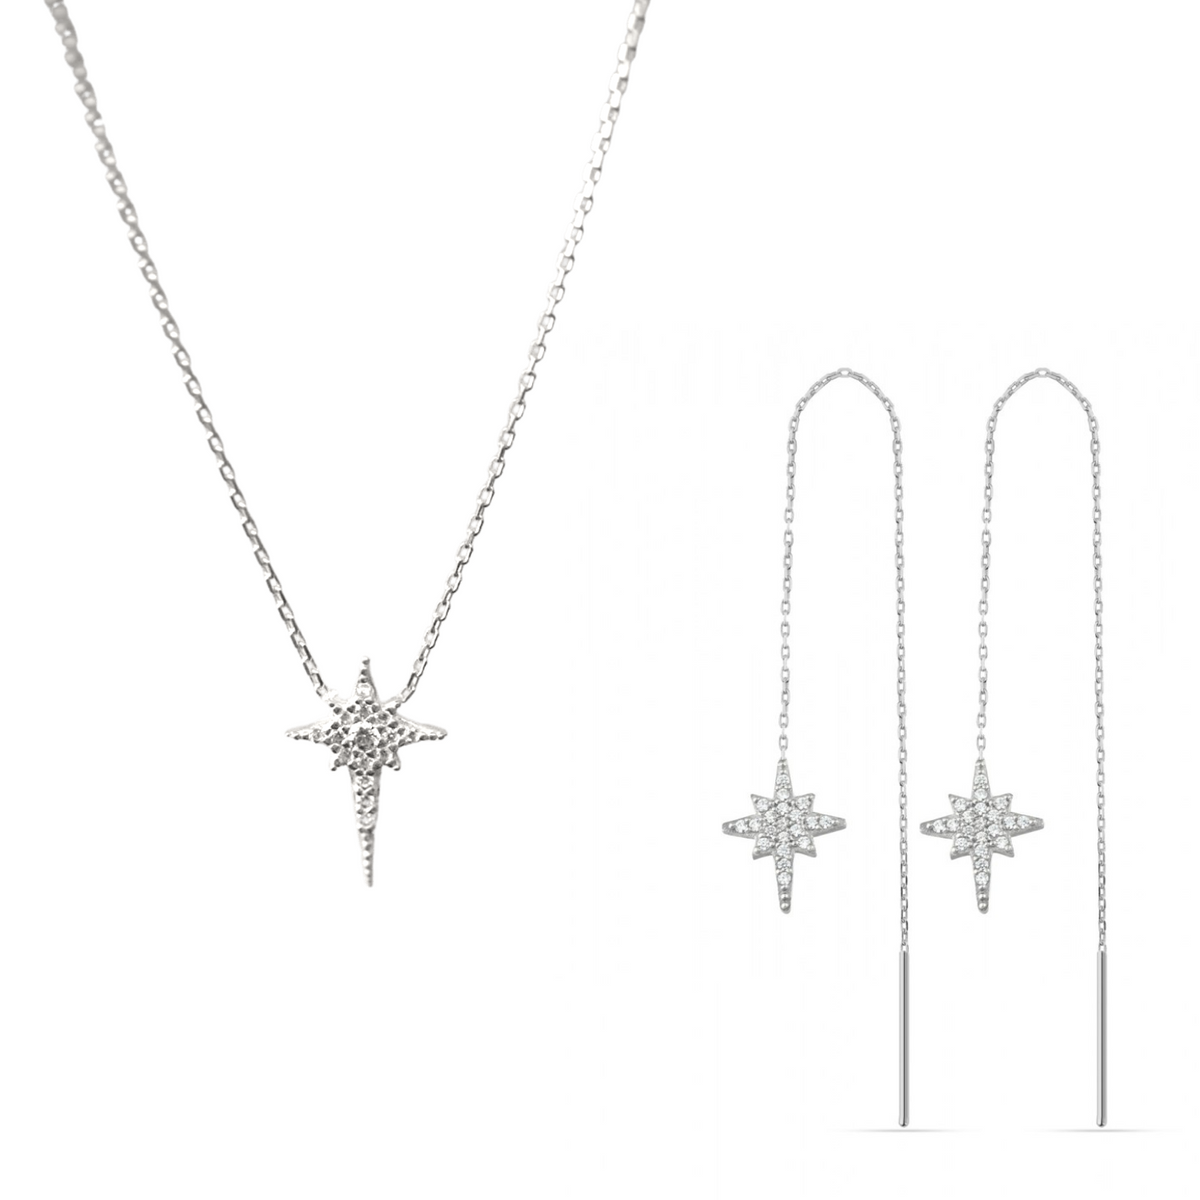 Northern Star Polaris Sterling Silver Necklace and Drop Chain Earring Set